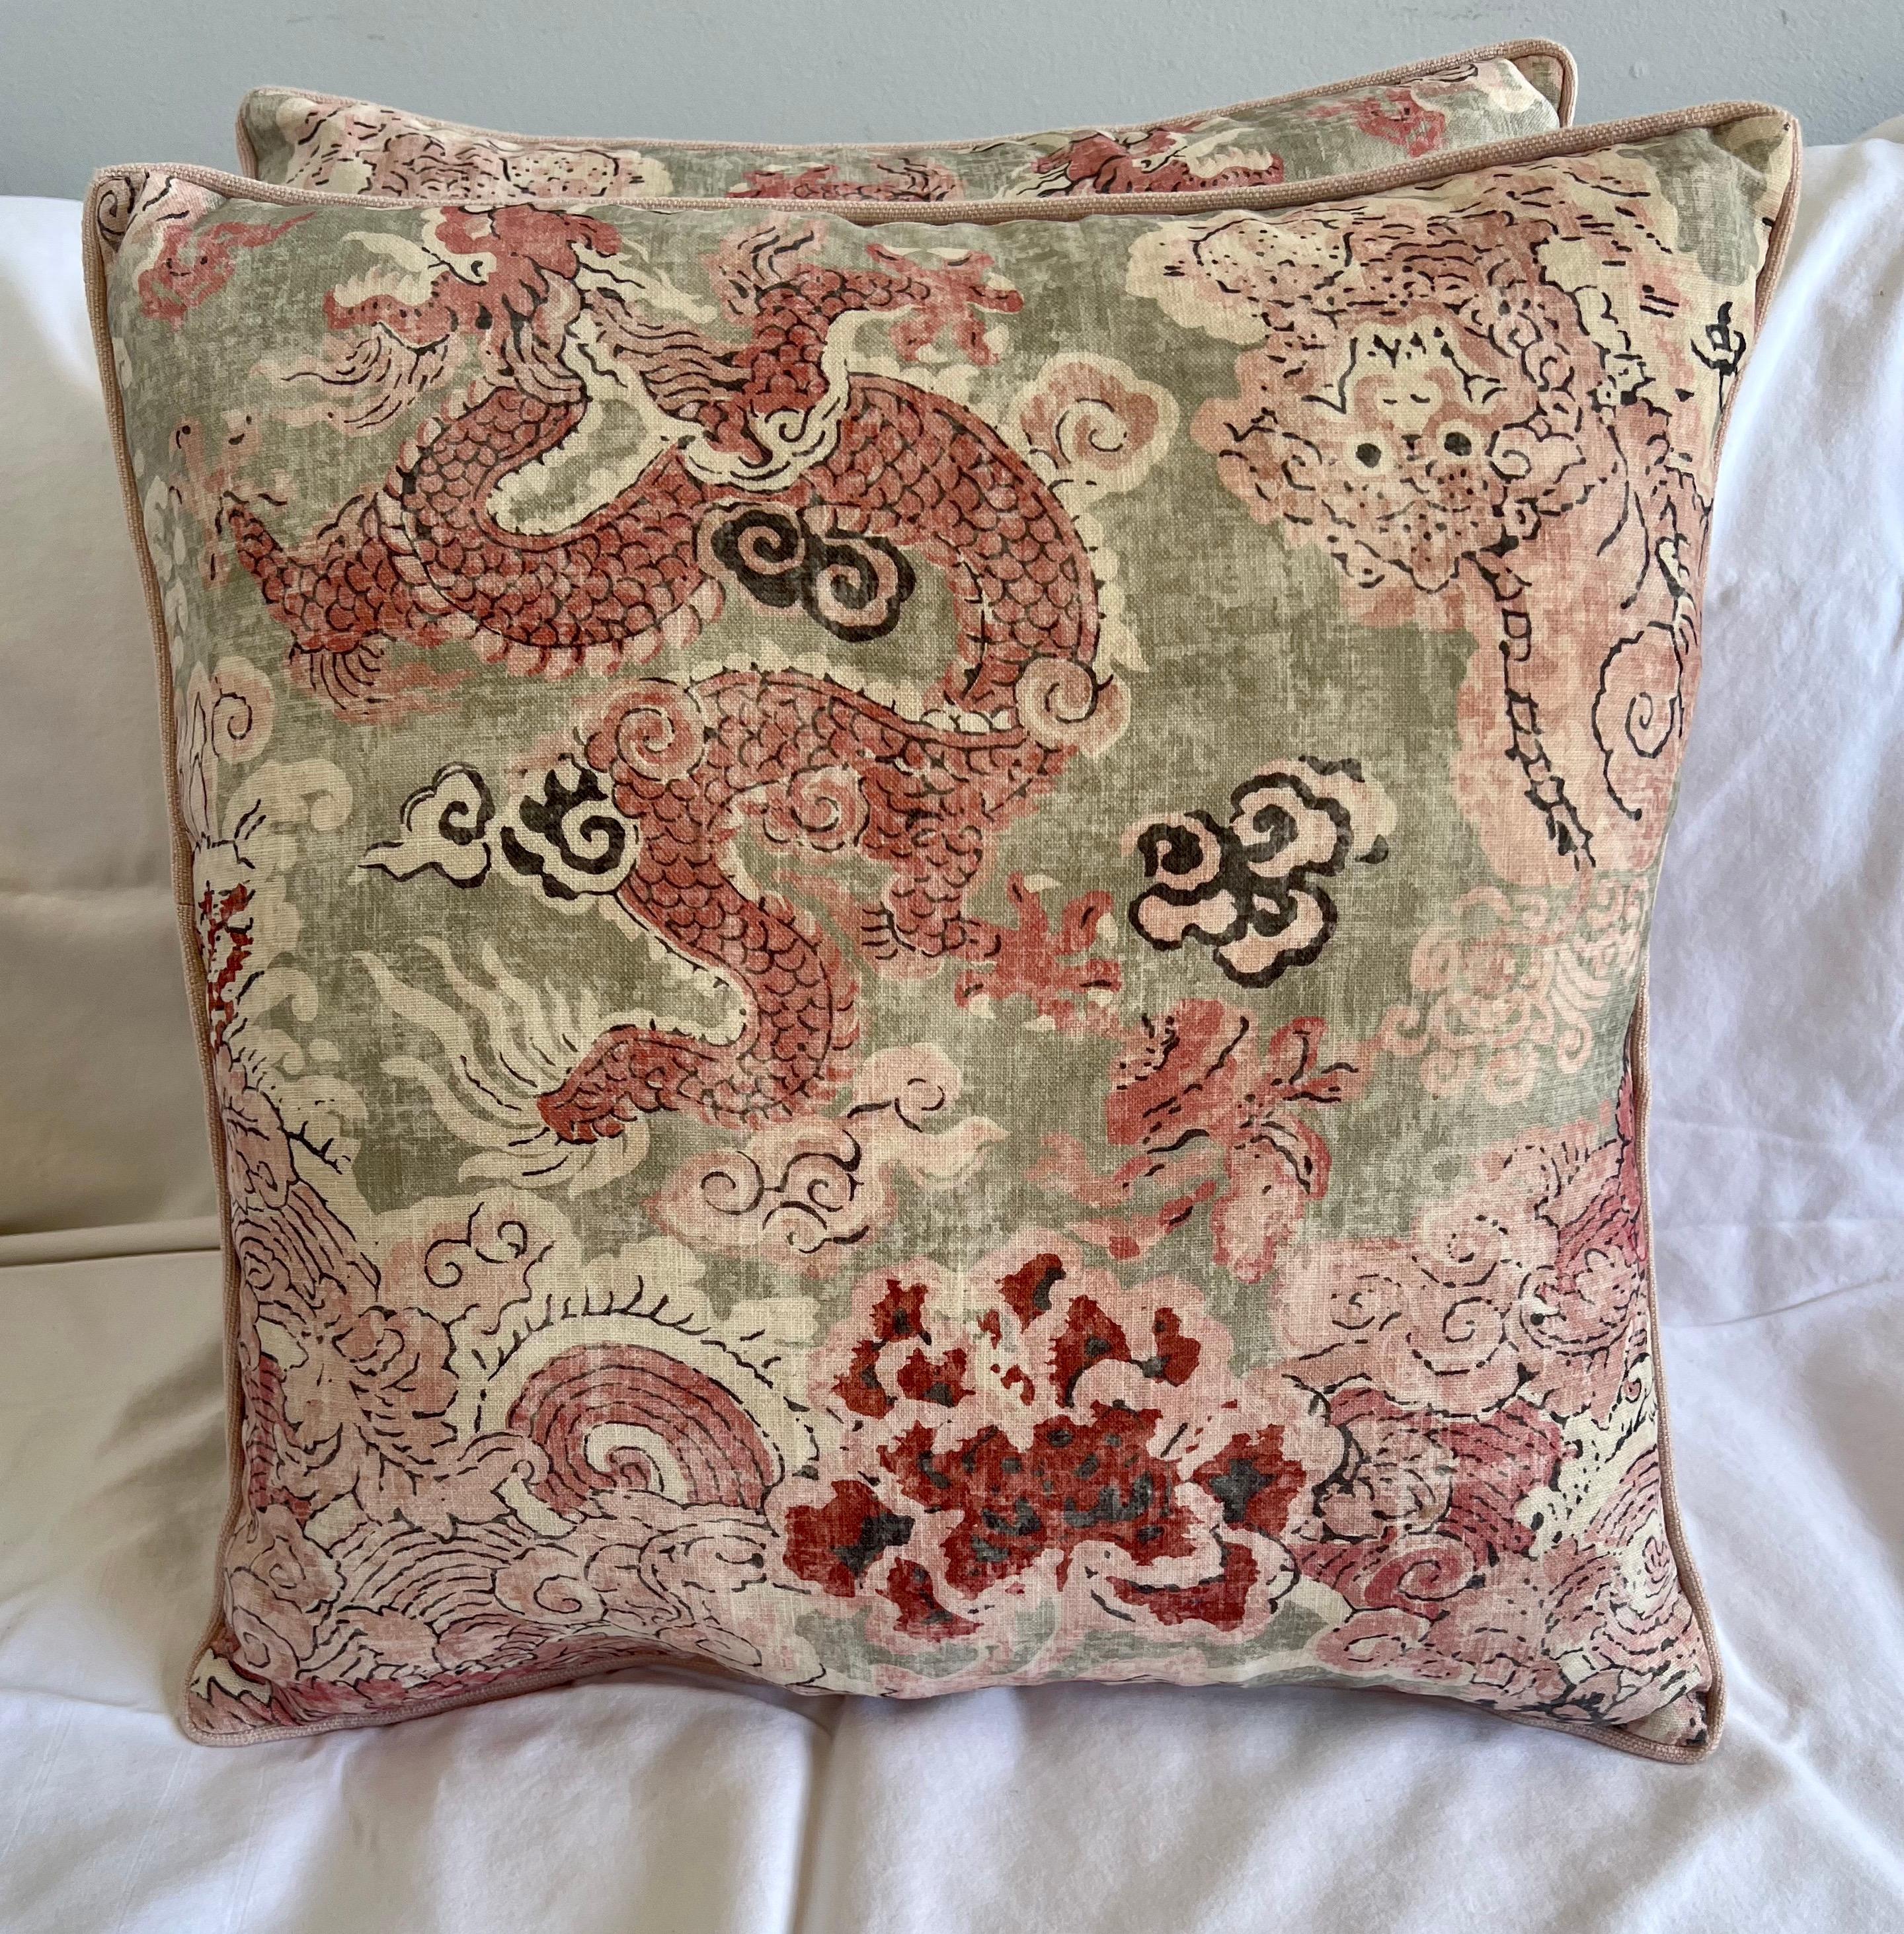 Pair of custom pillows made with chinoiserie printed cotton that is loomed in France. Soft pink linen backs with self cord detail. Down inserts.